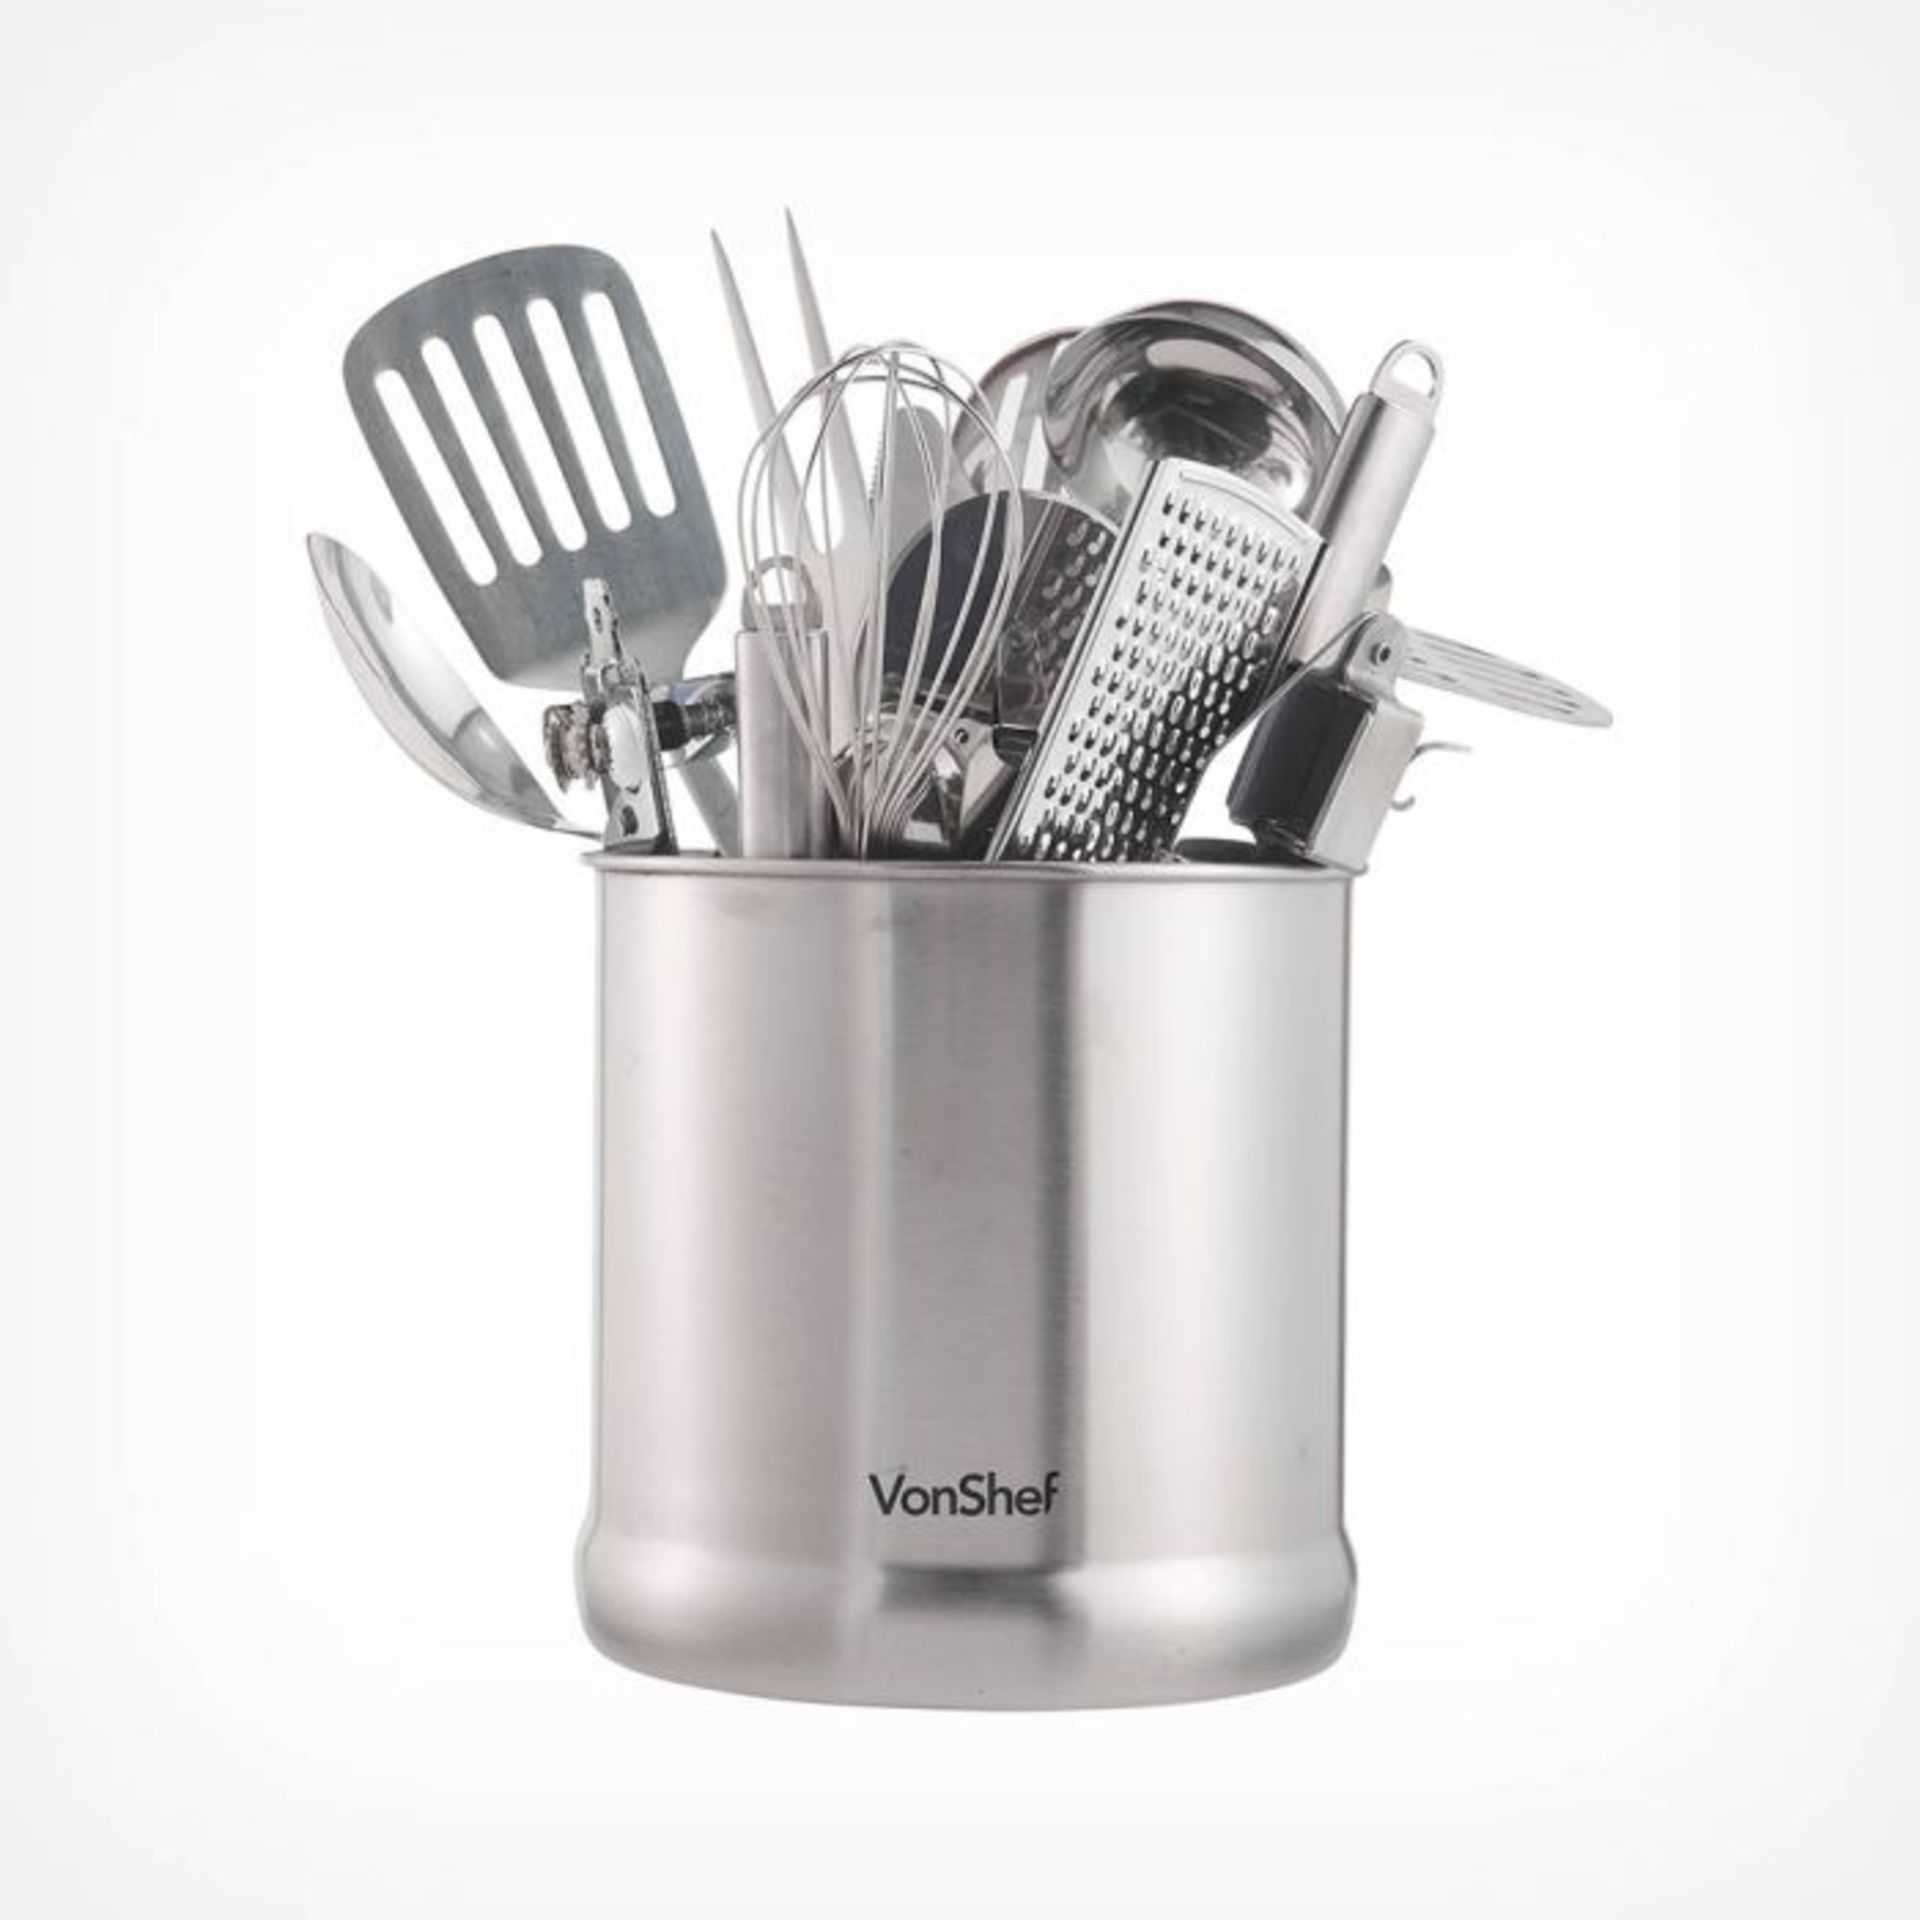 Utensil Holder. - PW. Take this cutlery caddy. Its 7" diameter means it’s large enough to store